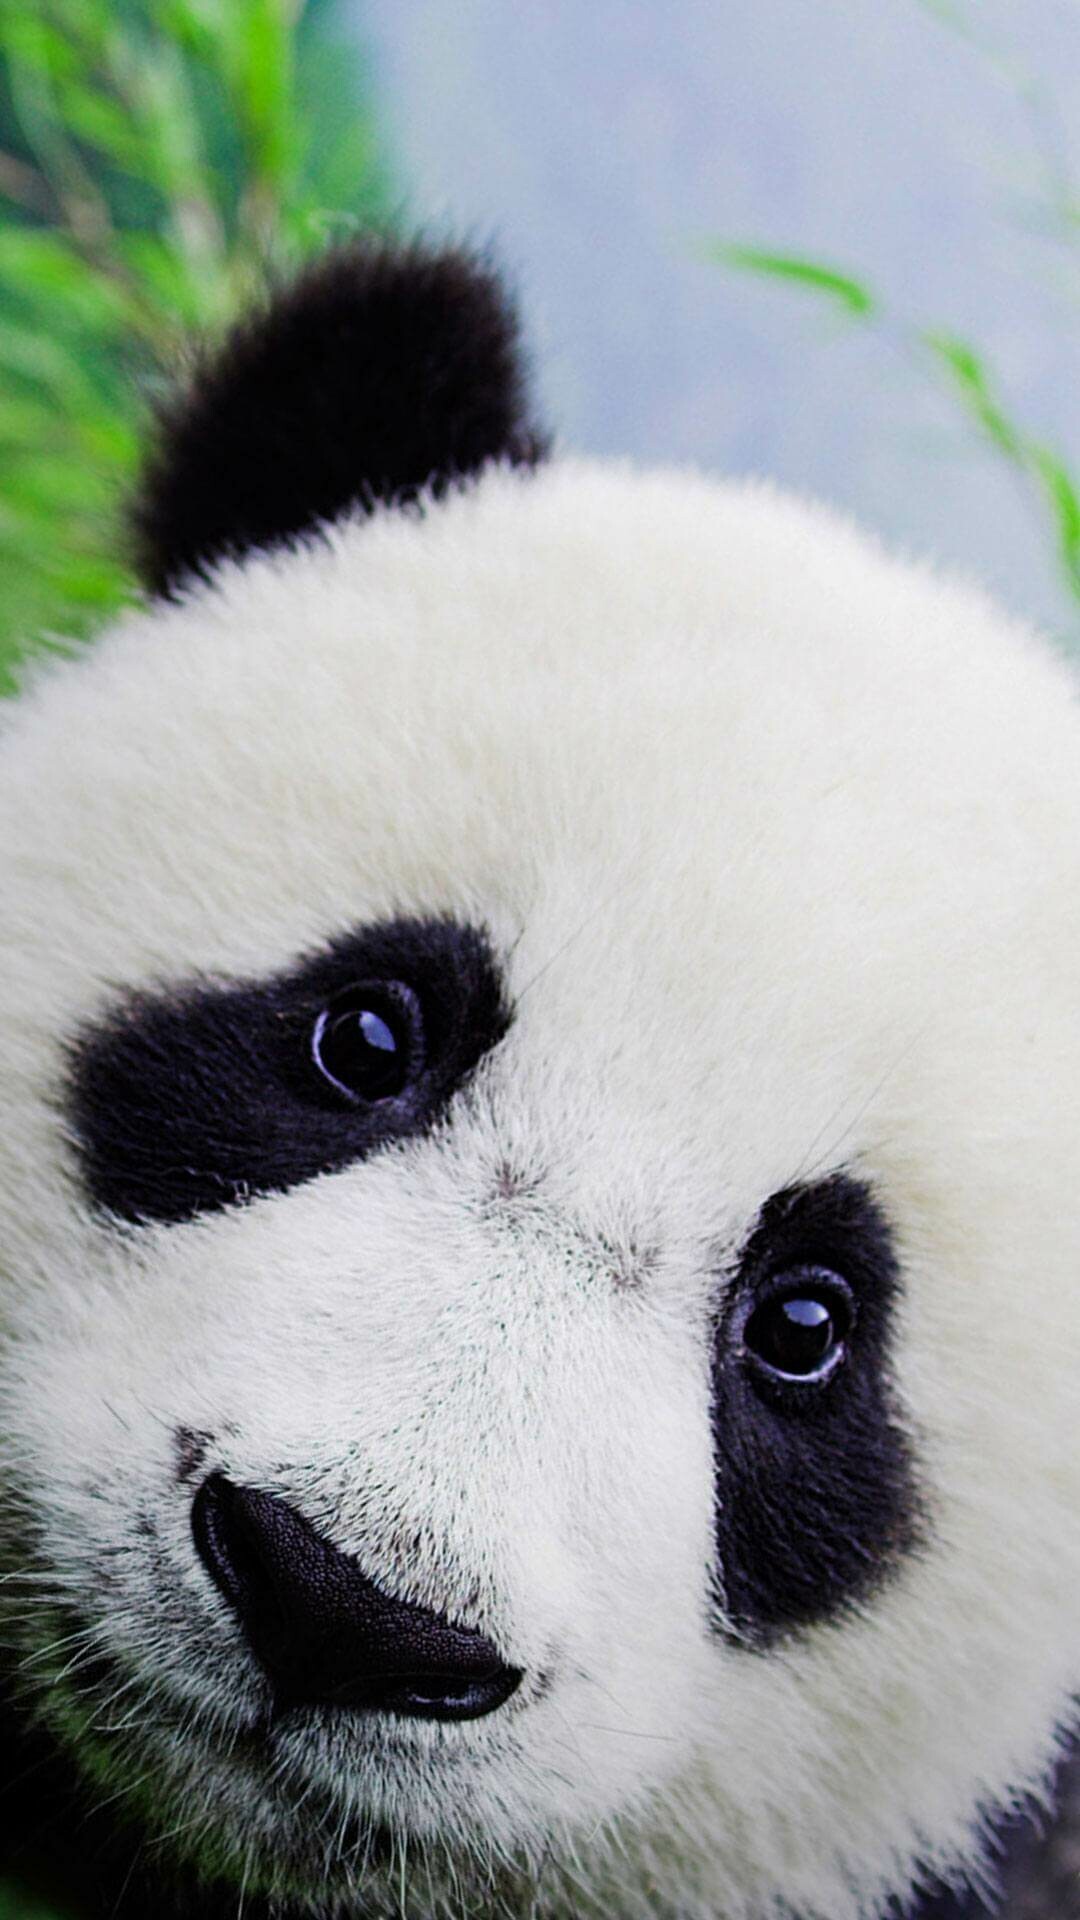 Panda: Black and white bears, Found in thick bamboo forests and high up in the mountains. 1080x1920 Full HD Wallpaper.